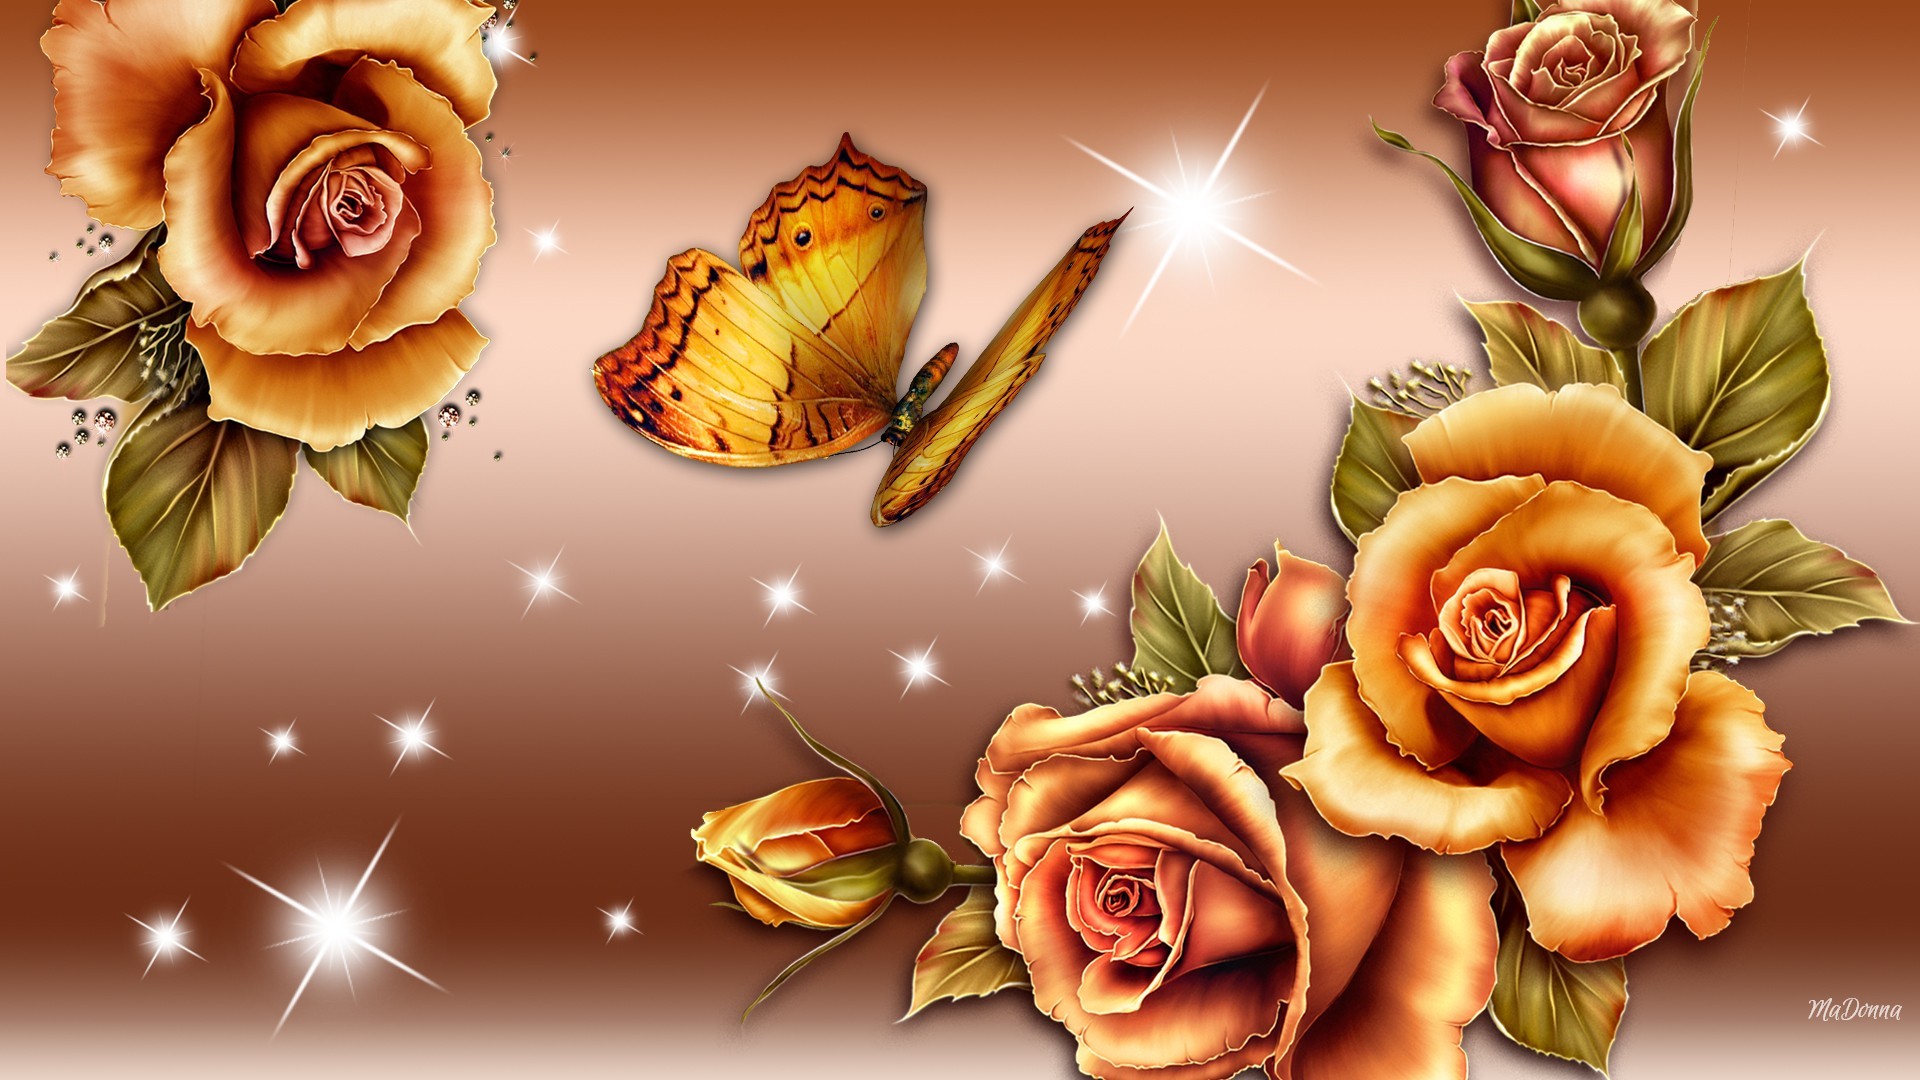 Rose And Butterfly Wallpaper Pictures